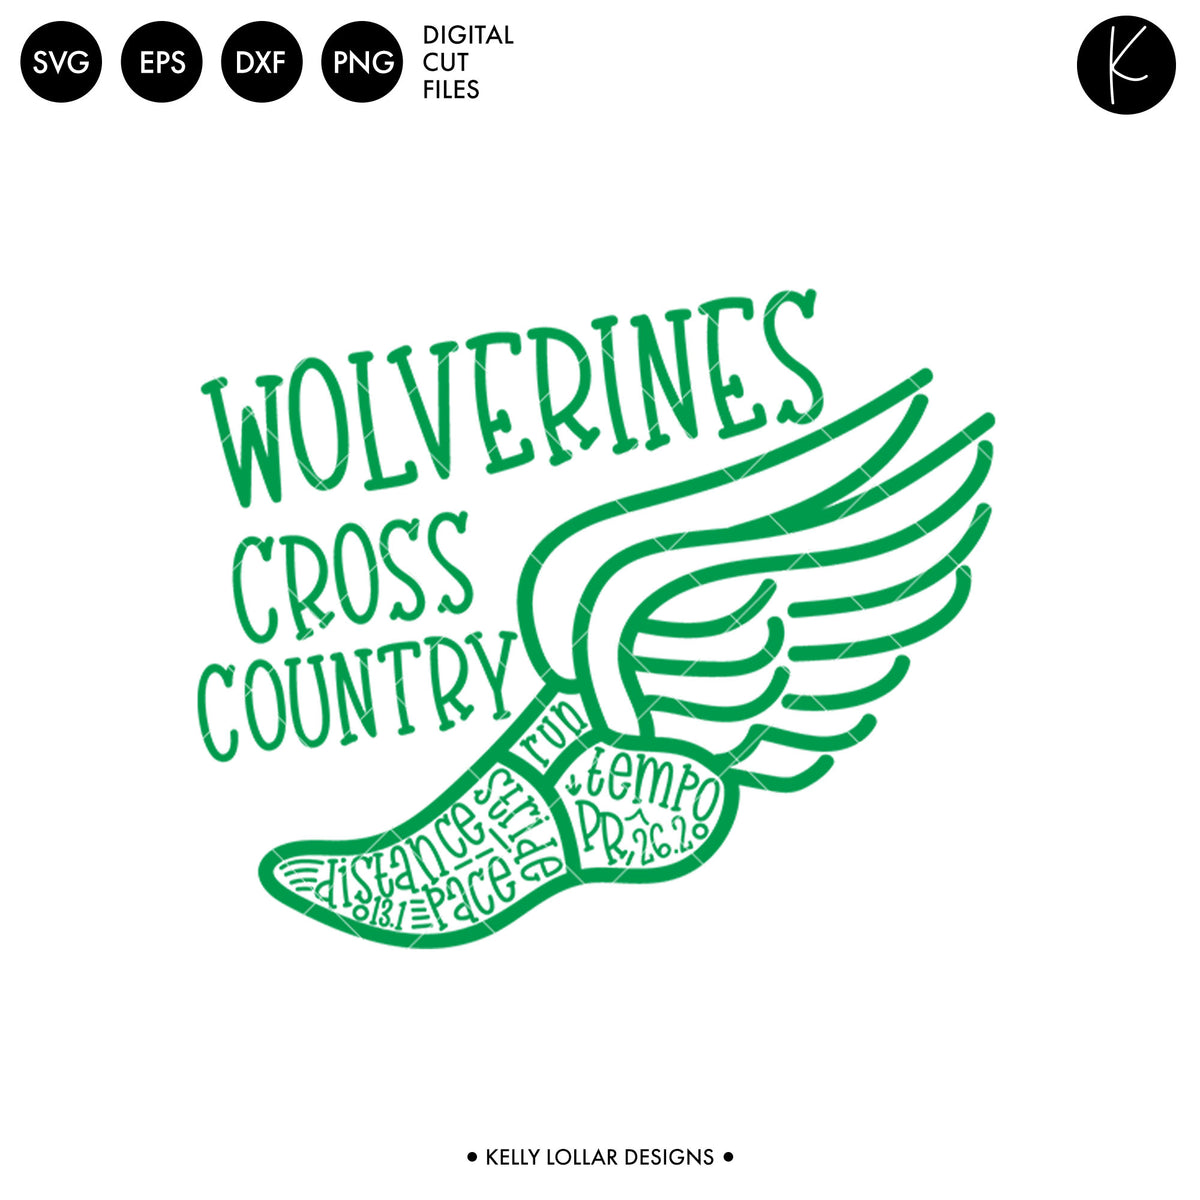 Wolverines Cross Country Bundle | SVG DXF EPS PNG Cut Files